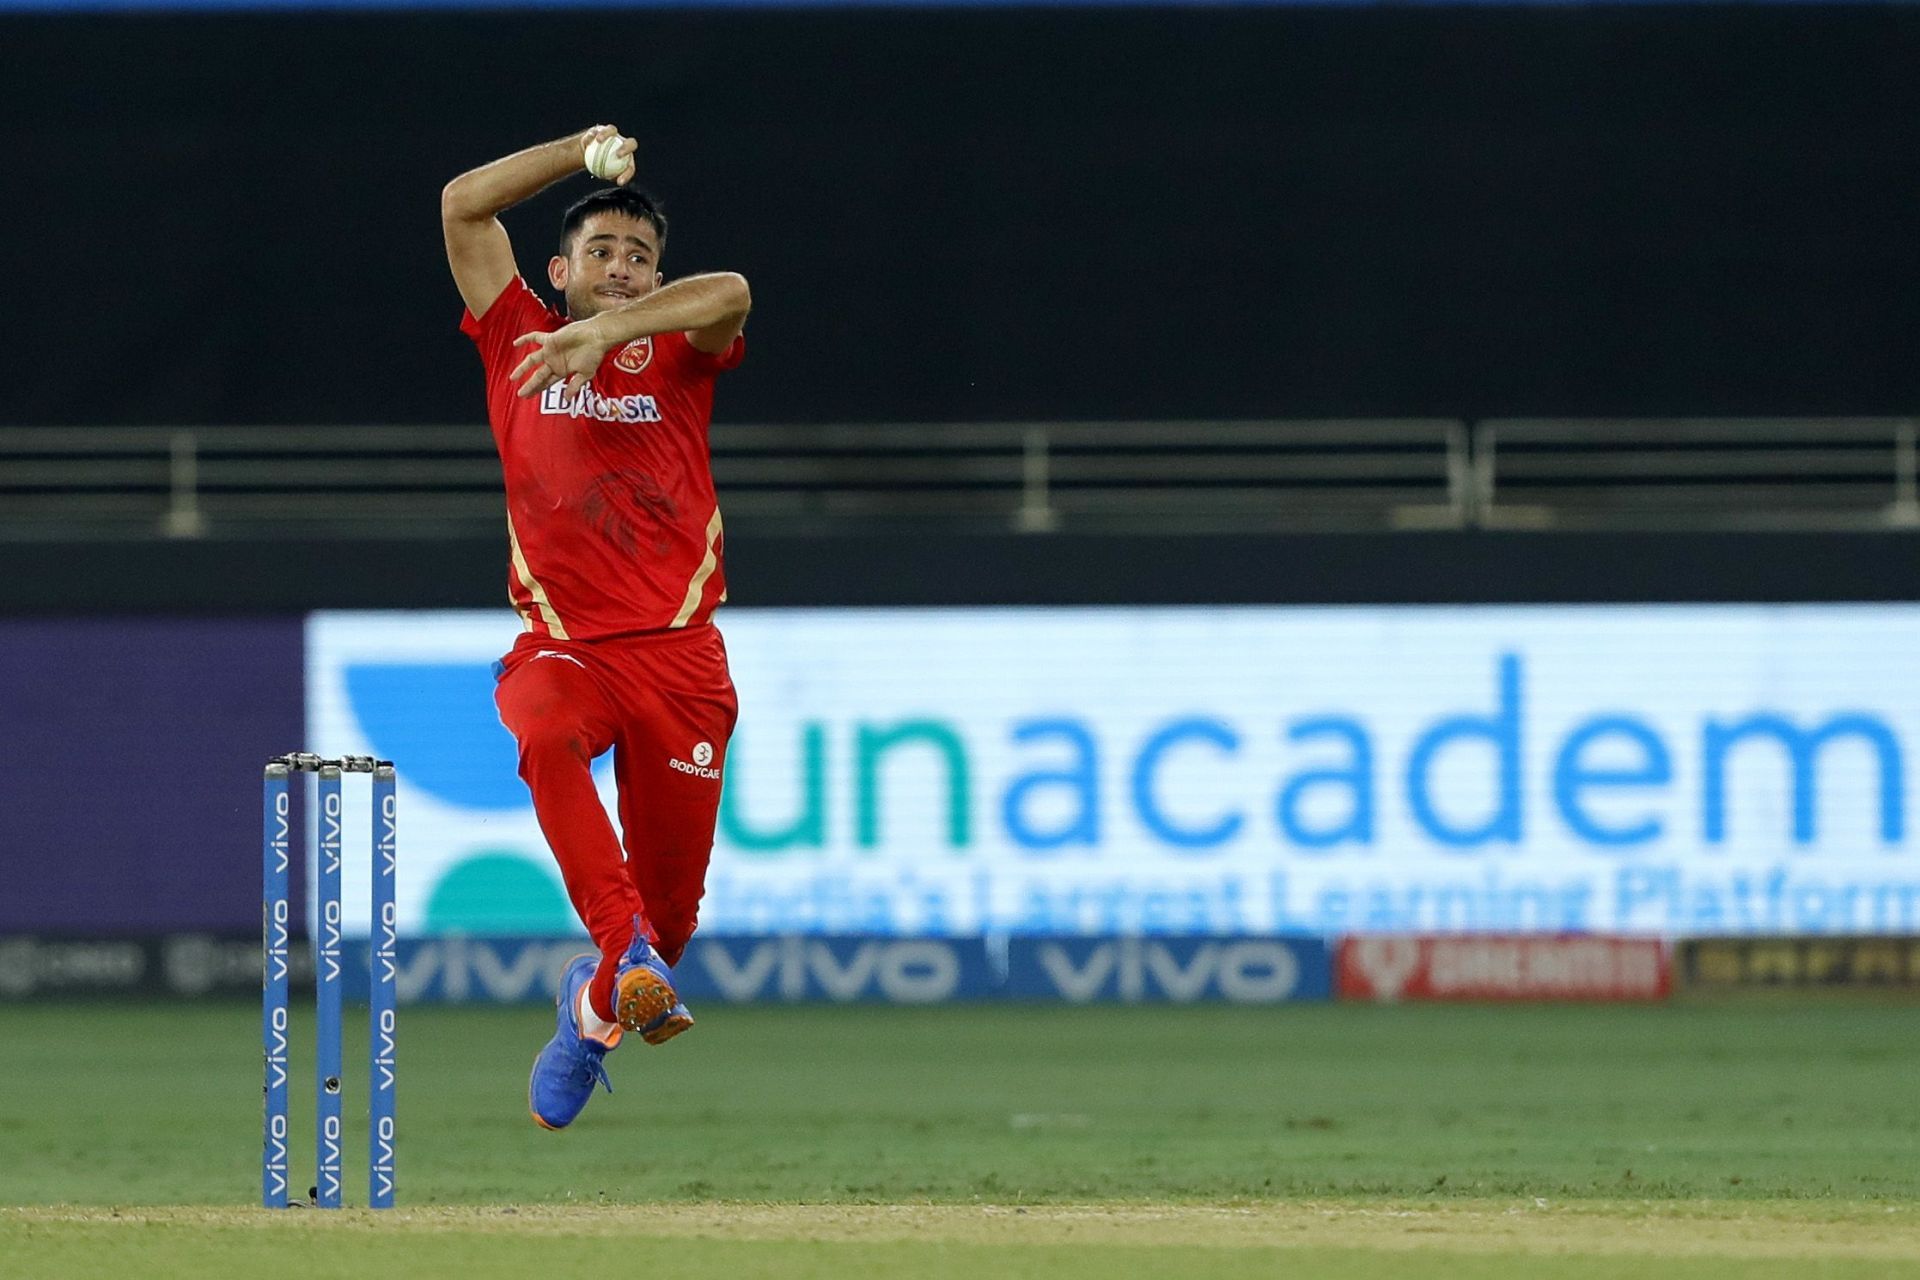 Ravi Bishnoi is one of the most exciting and highly rated leg-spinners doing the rounds in Indian cricket (Picture Credits: Saikat Das/Sportzpics for IPL).